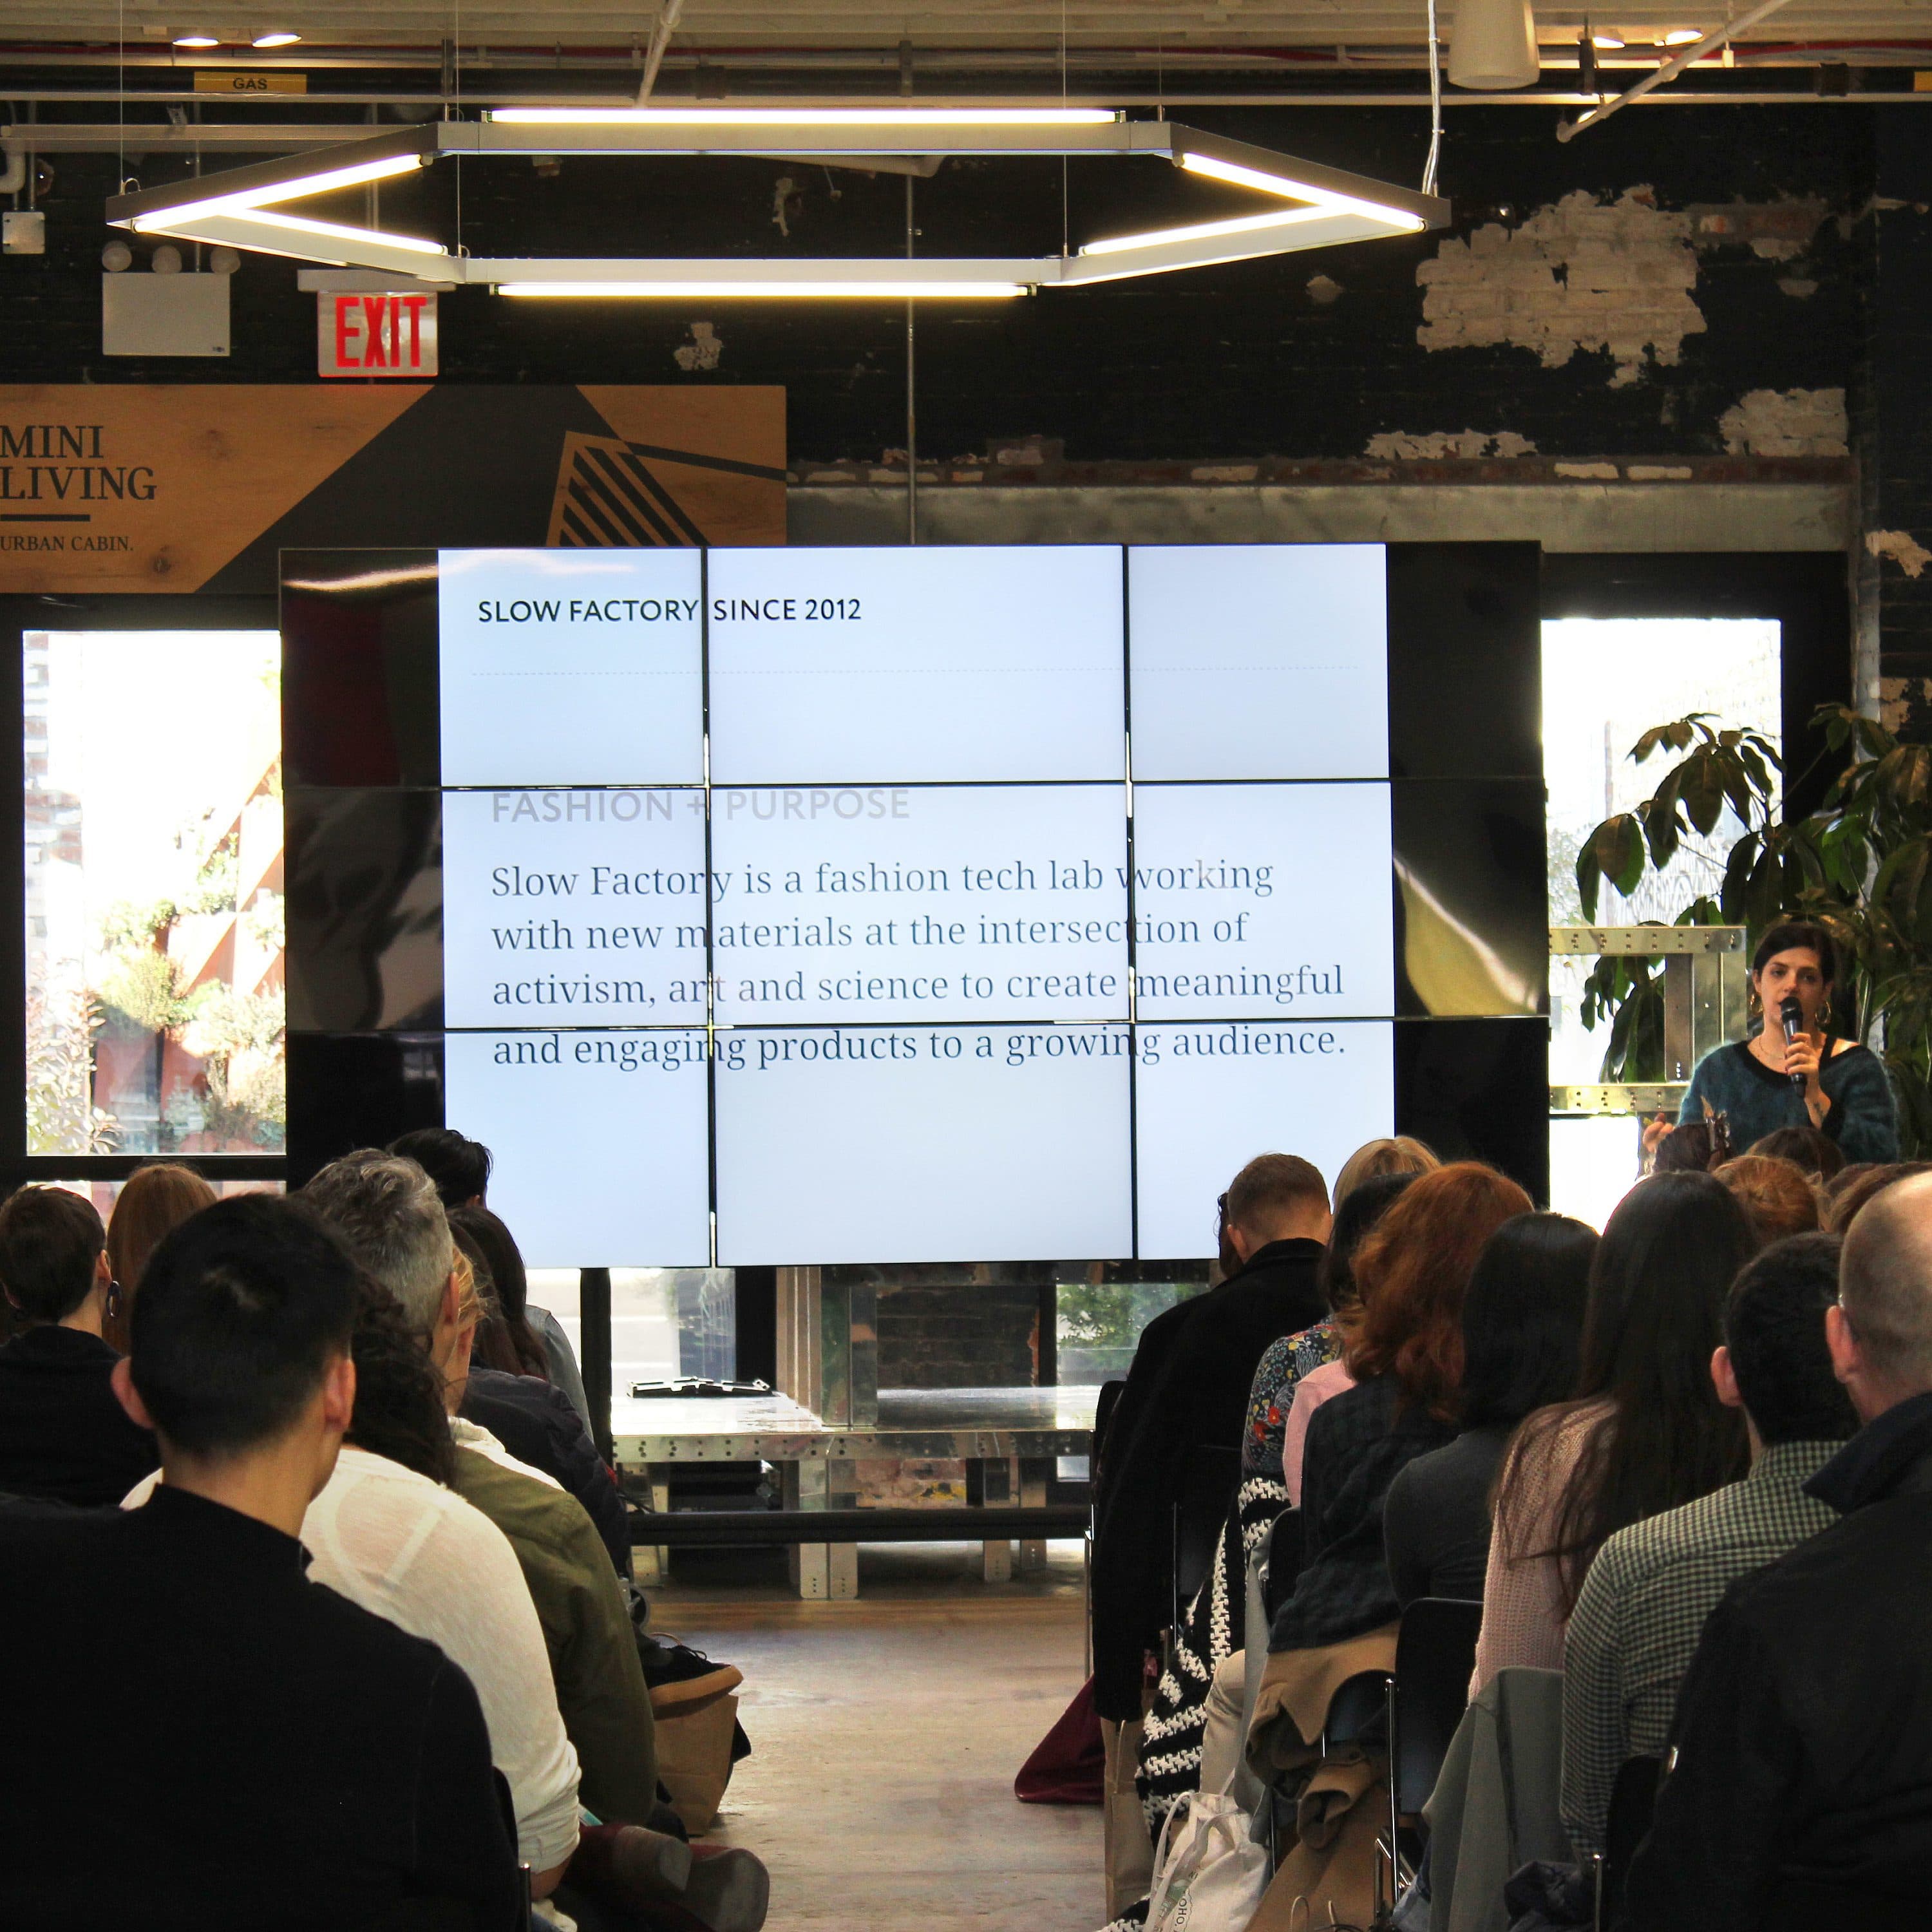 A speaker stands near a large screen with a presentation titled "SLOW FACTORY SINCE 2012," addressing an audience in an industrial-style room. The audience, seated in rows, listens attentively. The room features exposed brick walls and lighting fixtures.